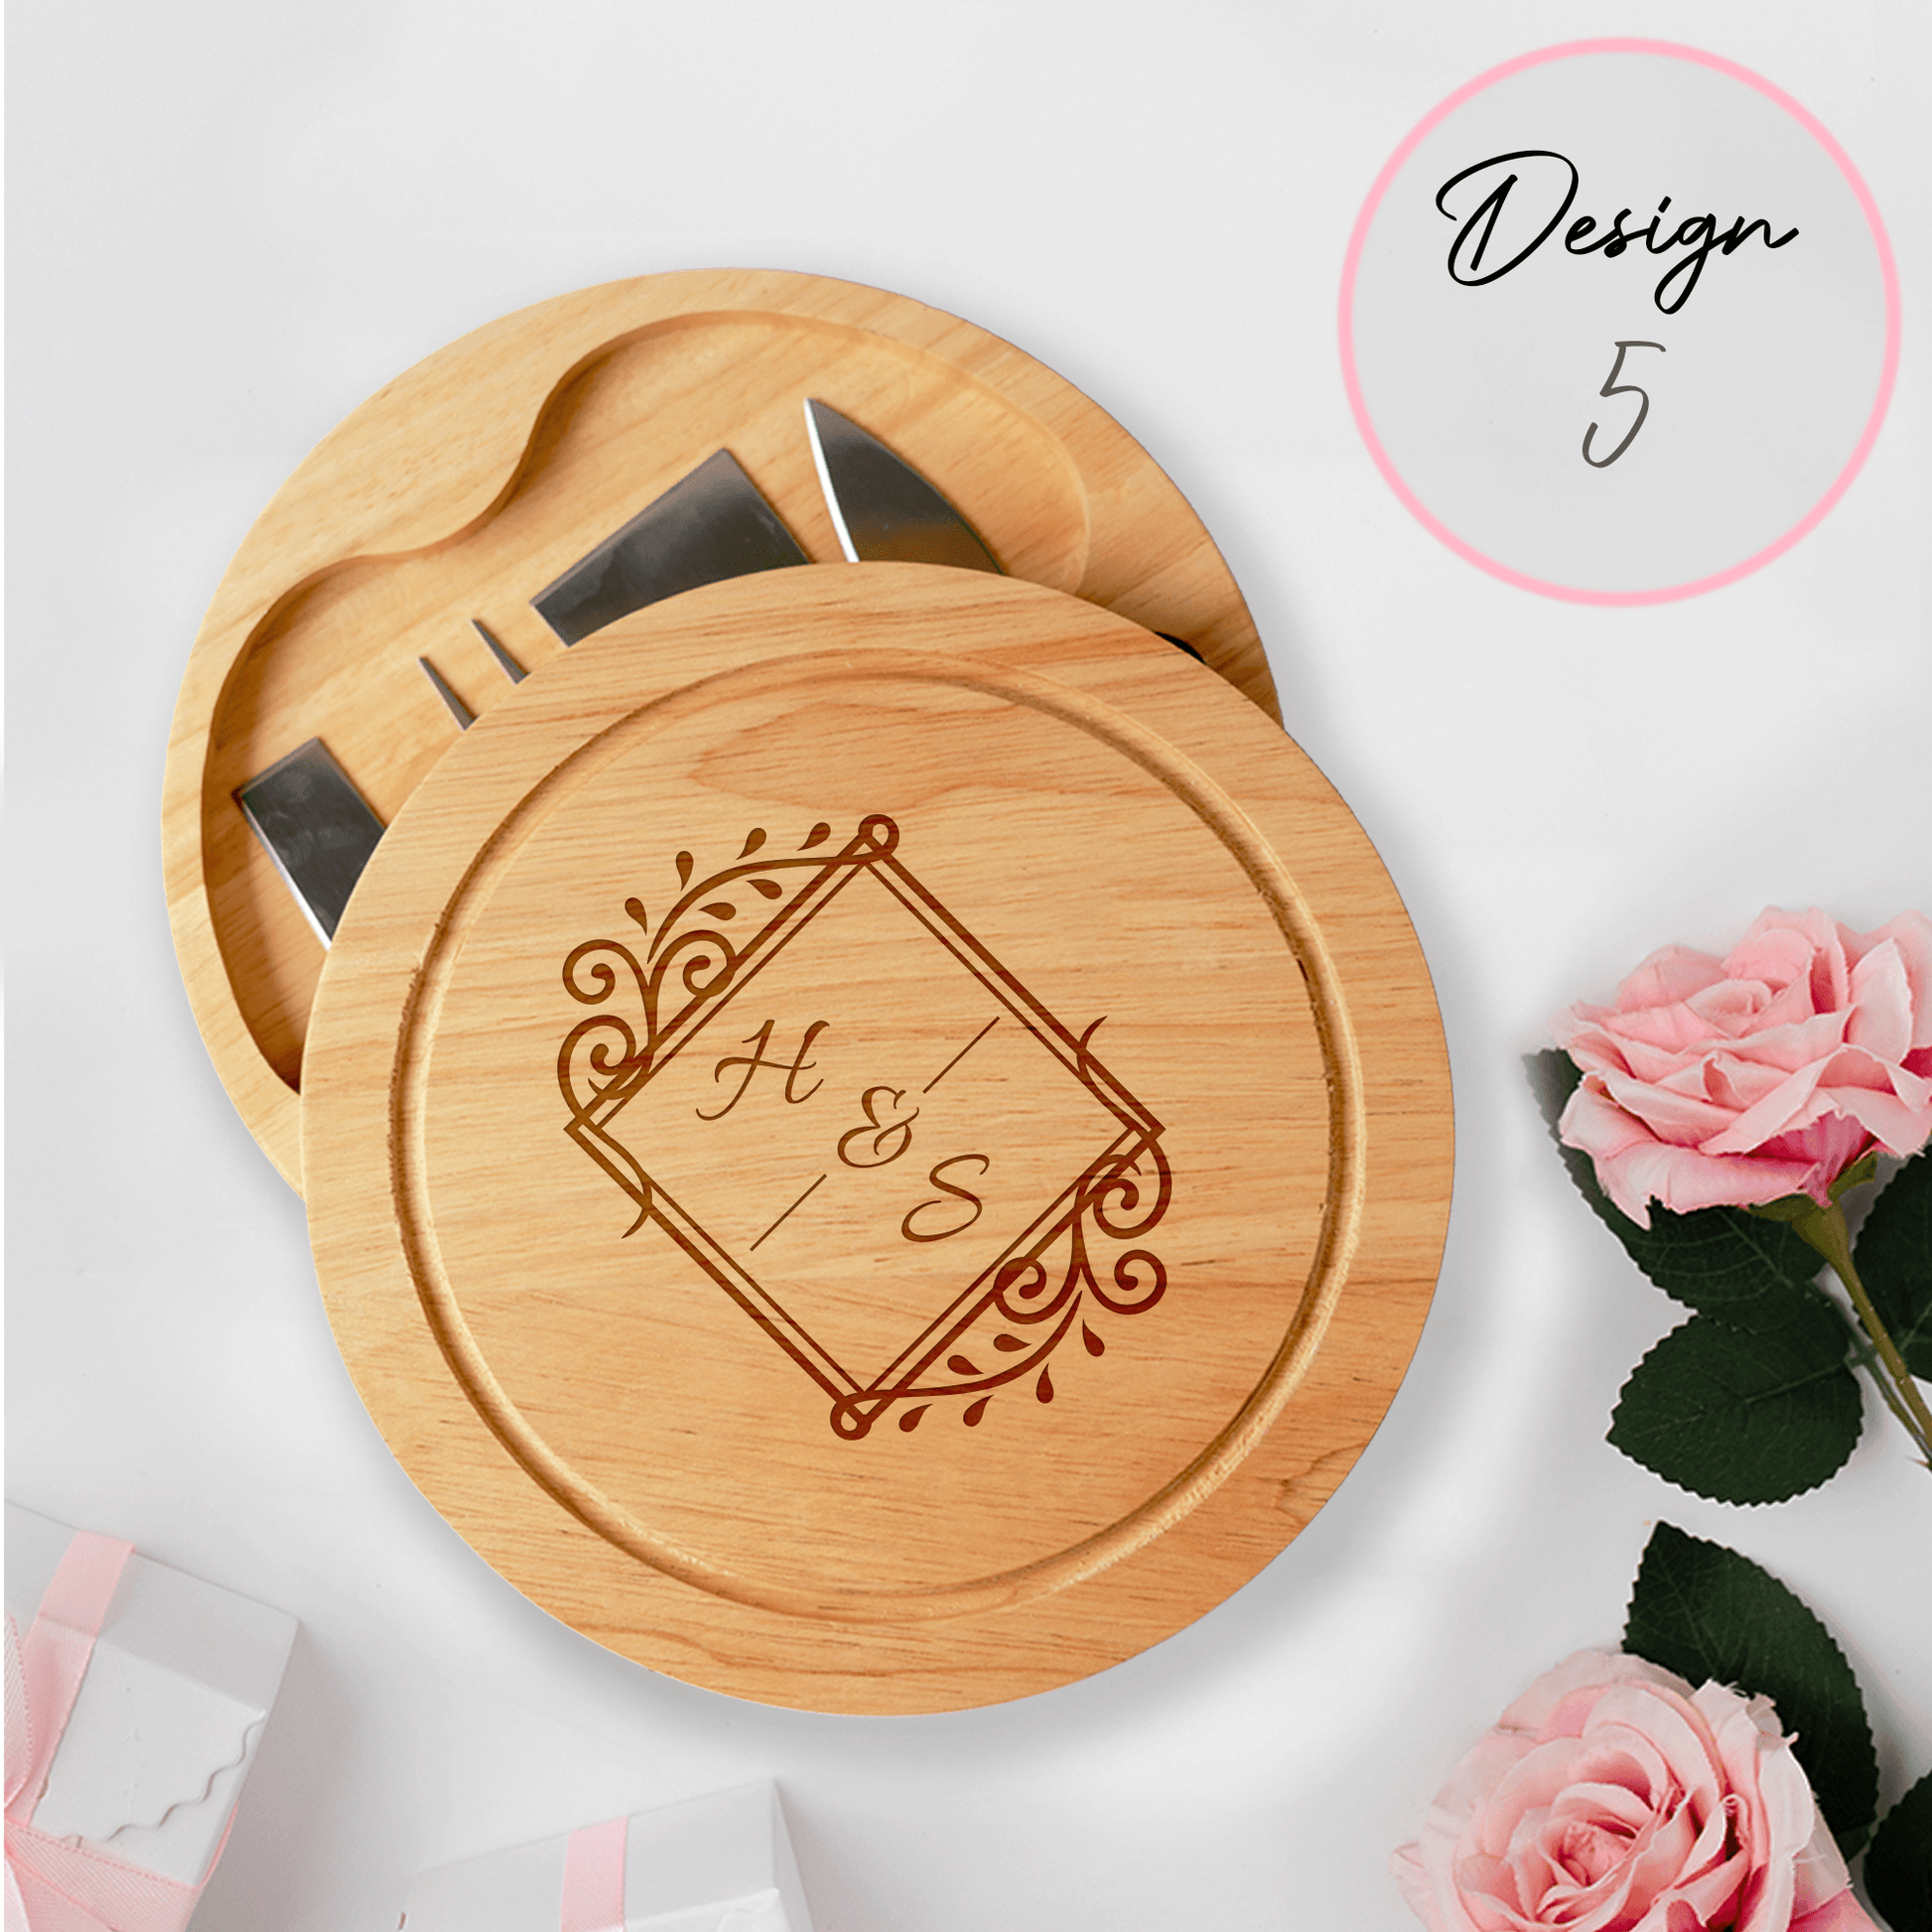 Personalised Engraved Cheese Board Wedding Gift - So Bespoke Gifts